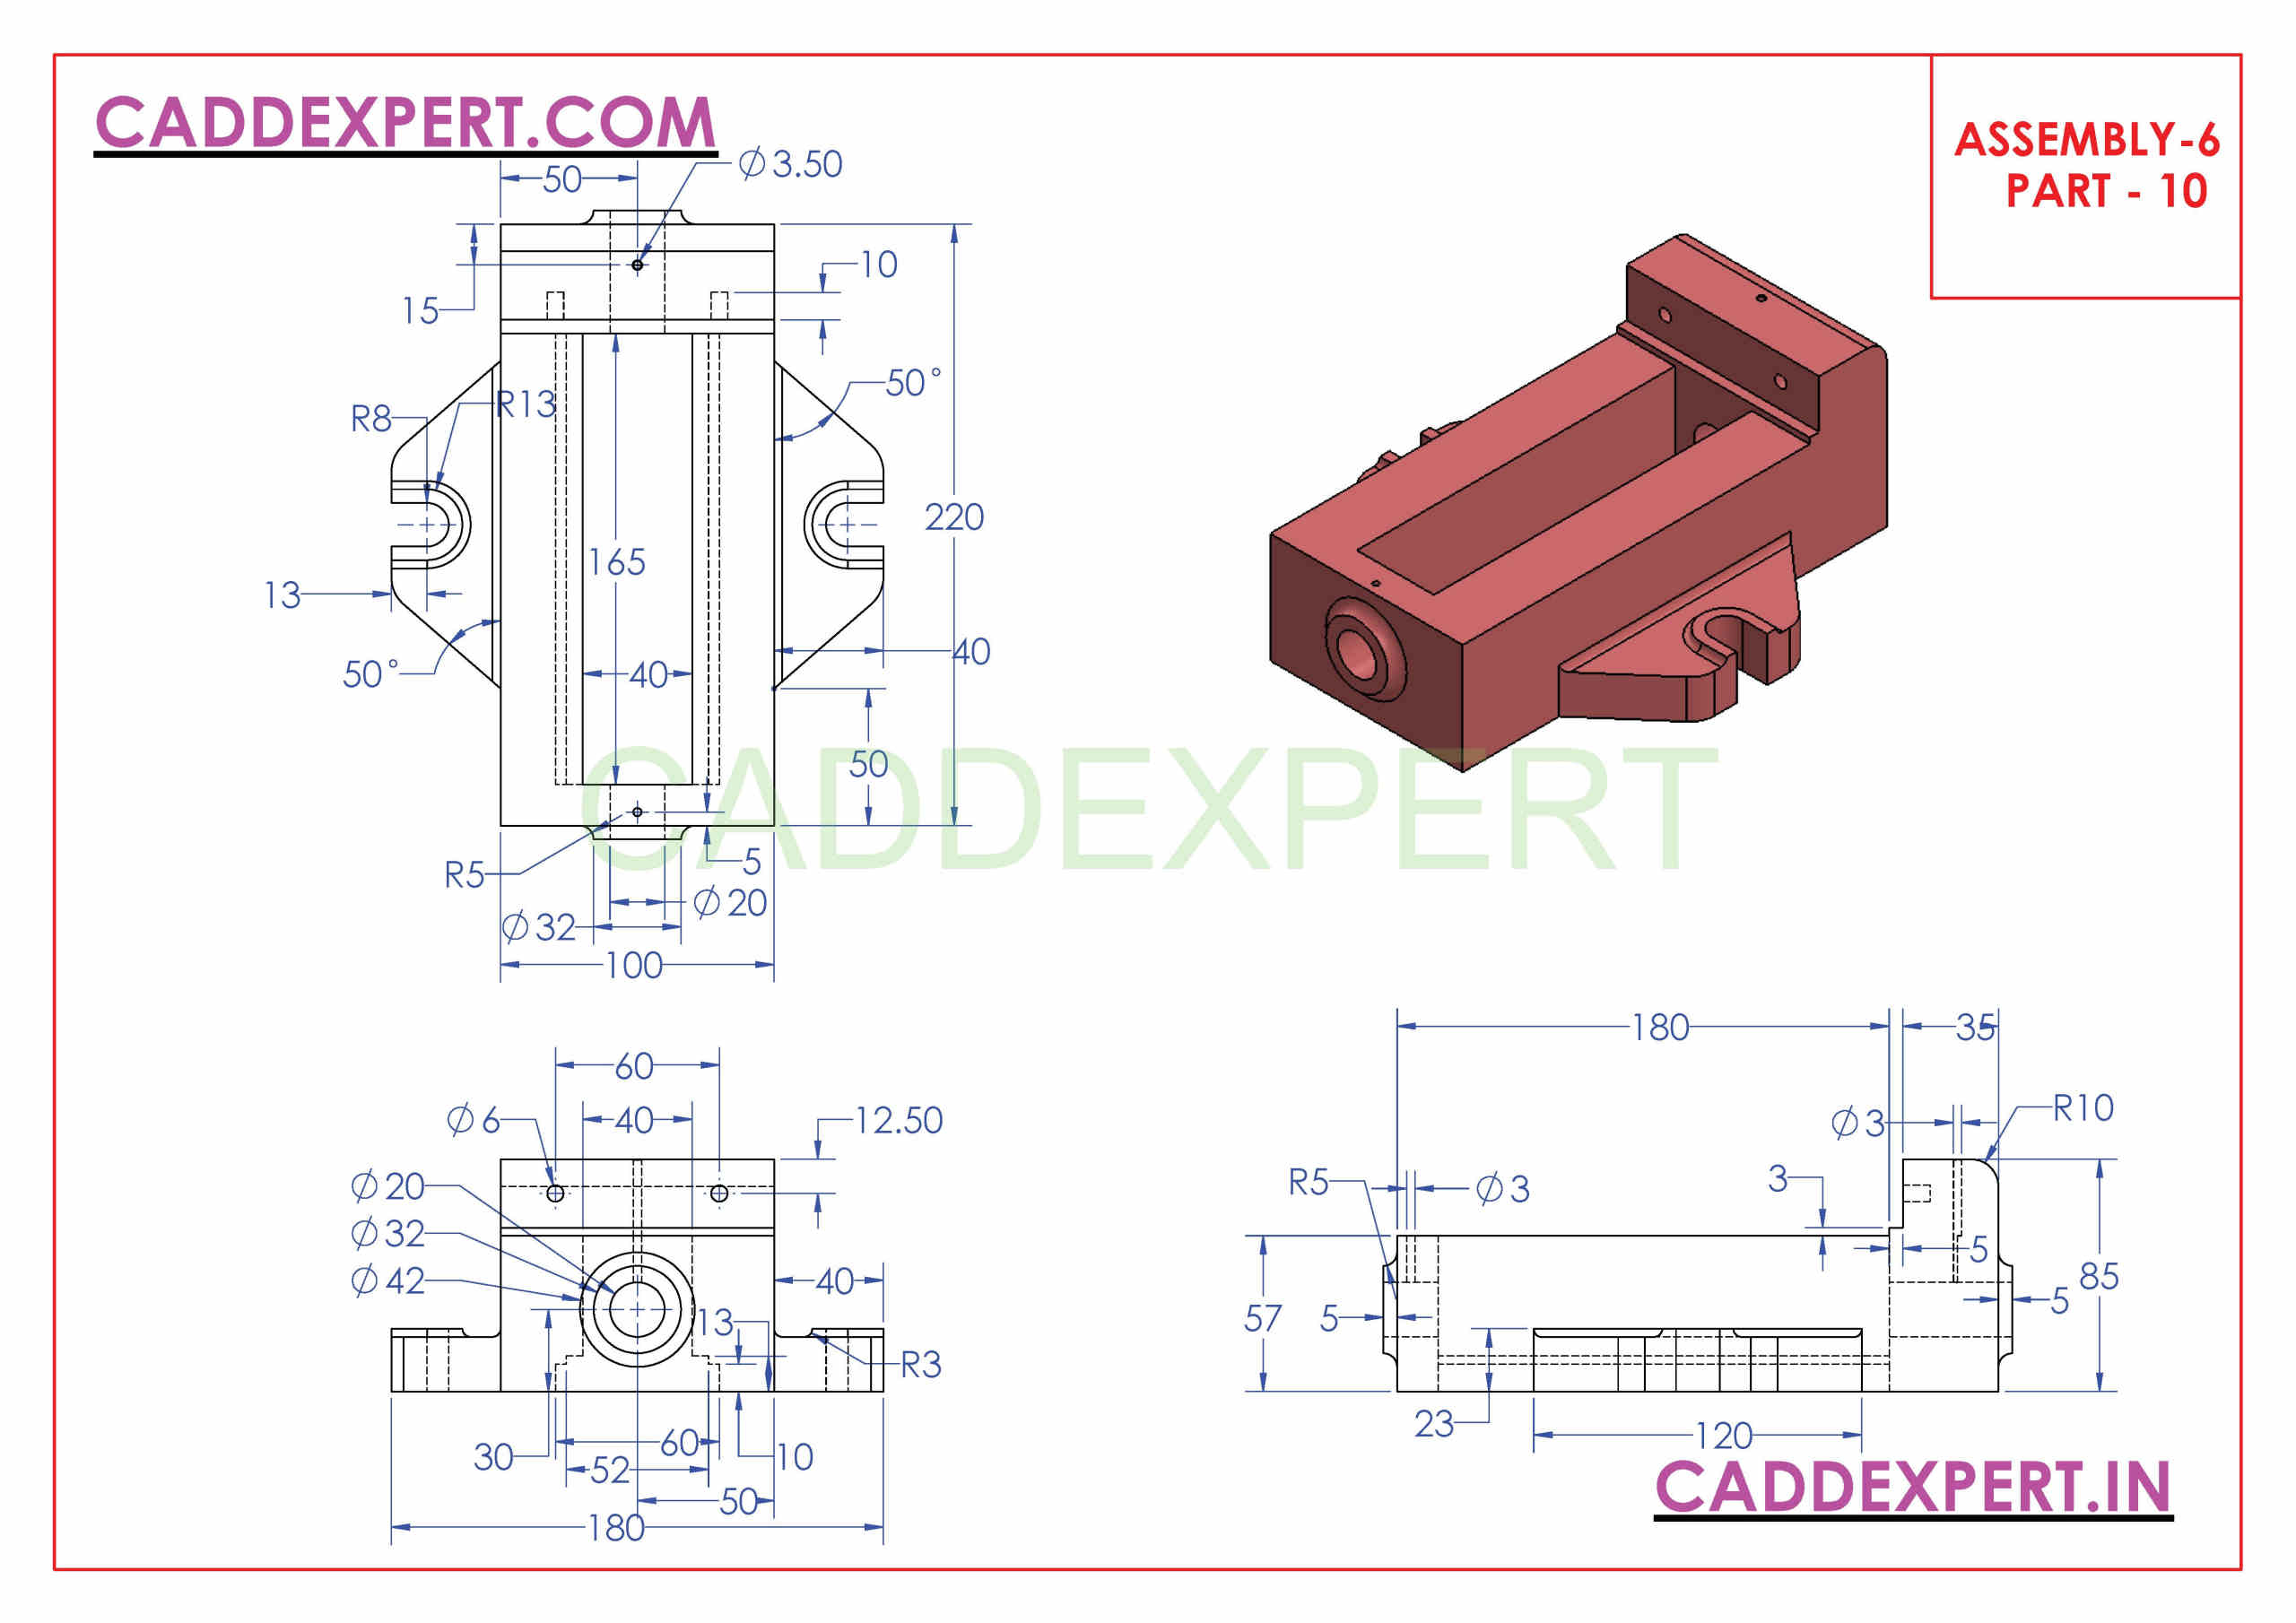 Discover more than 97 solidworks assembly drawing